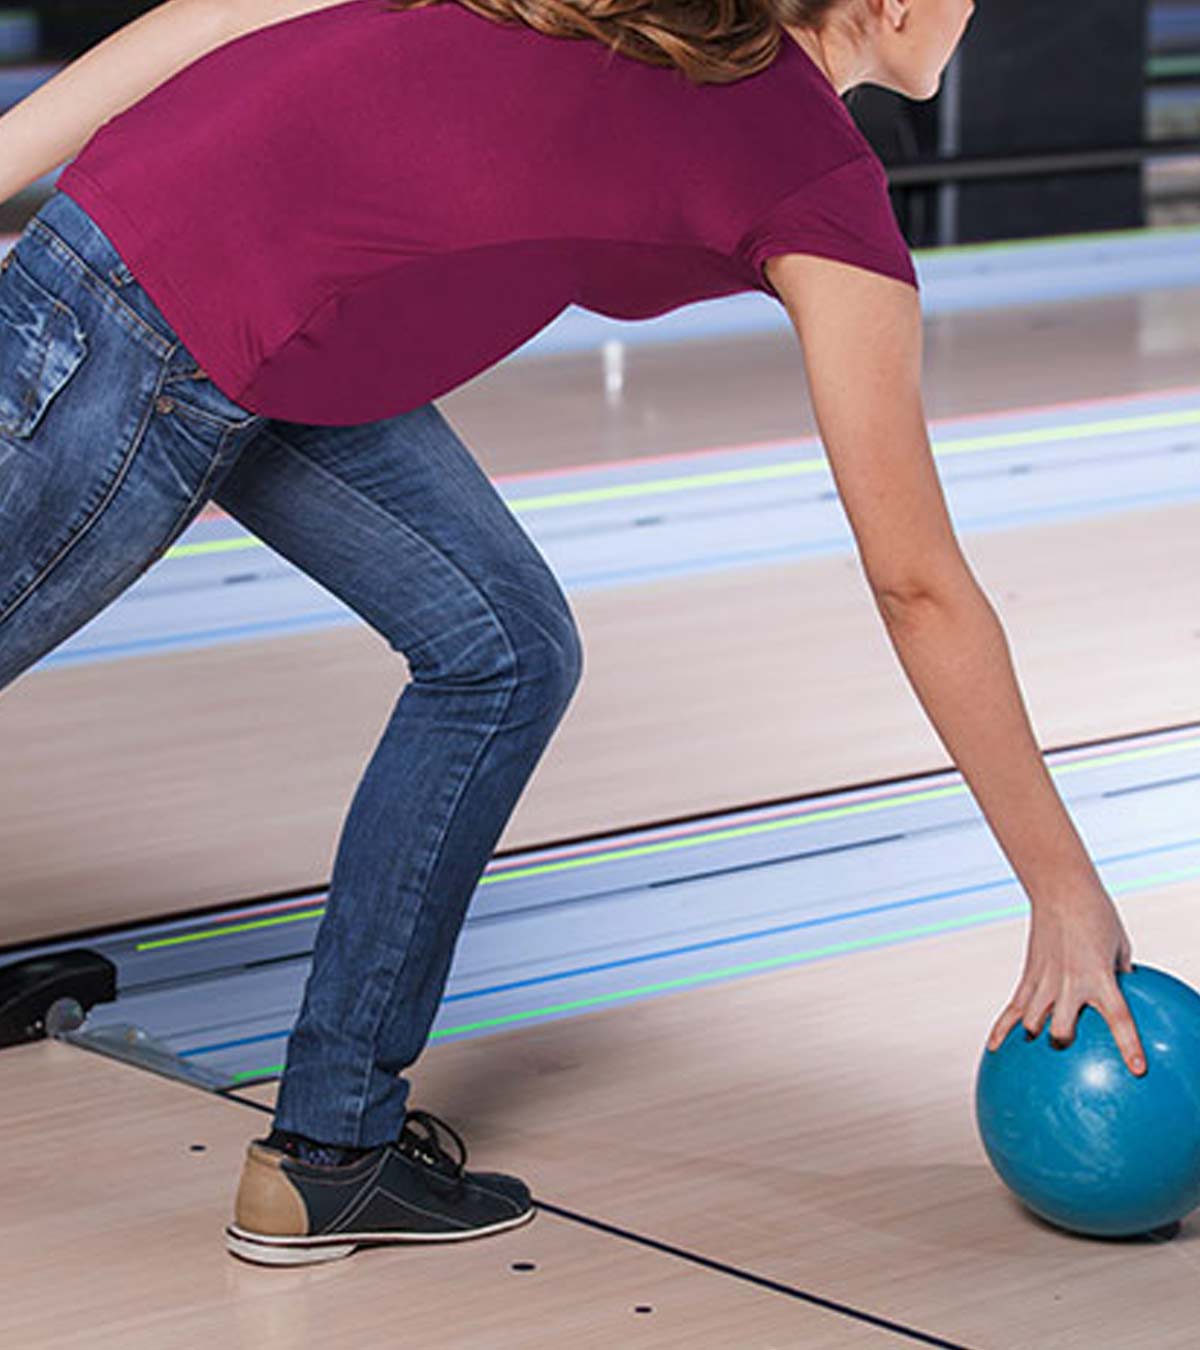 Is It Safe To Go Bowling While Pregnant?